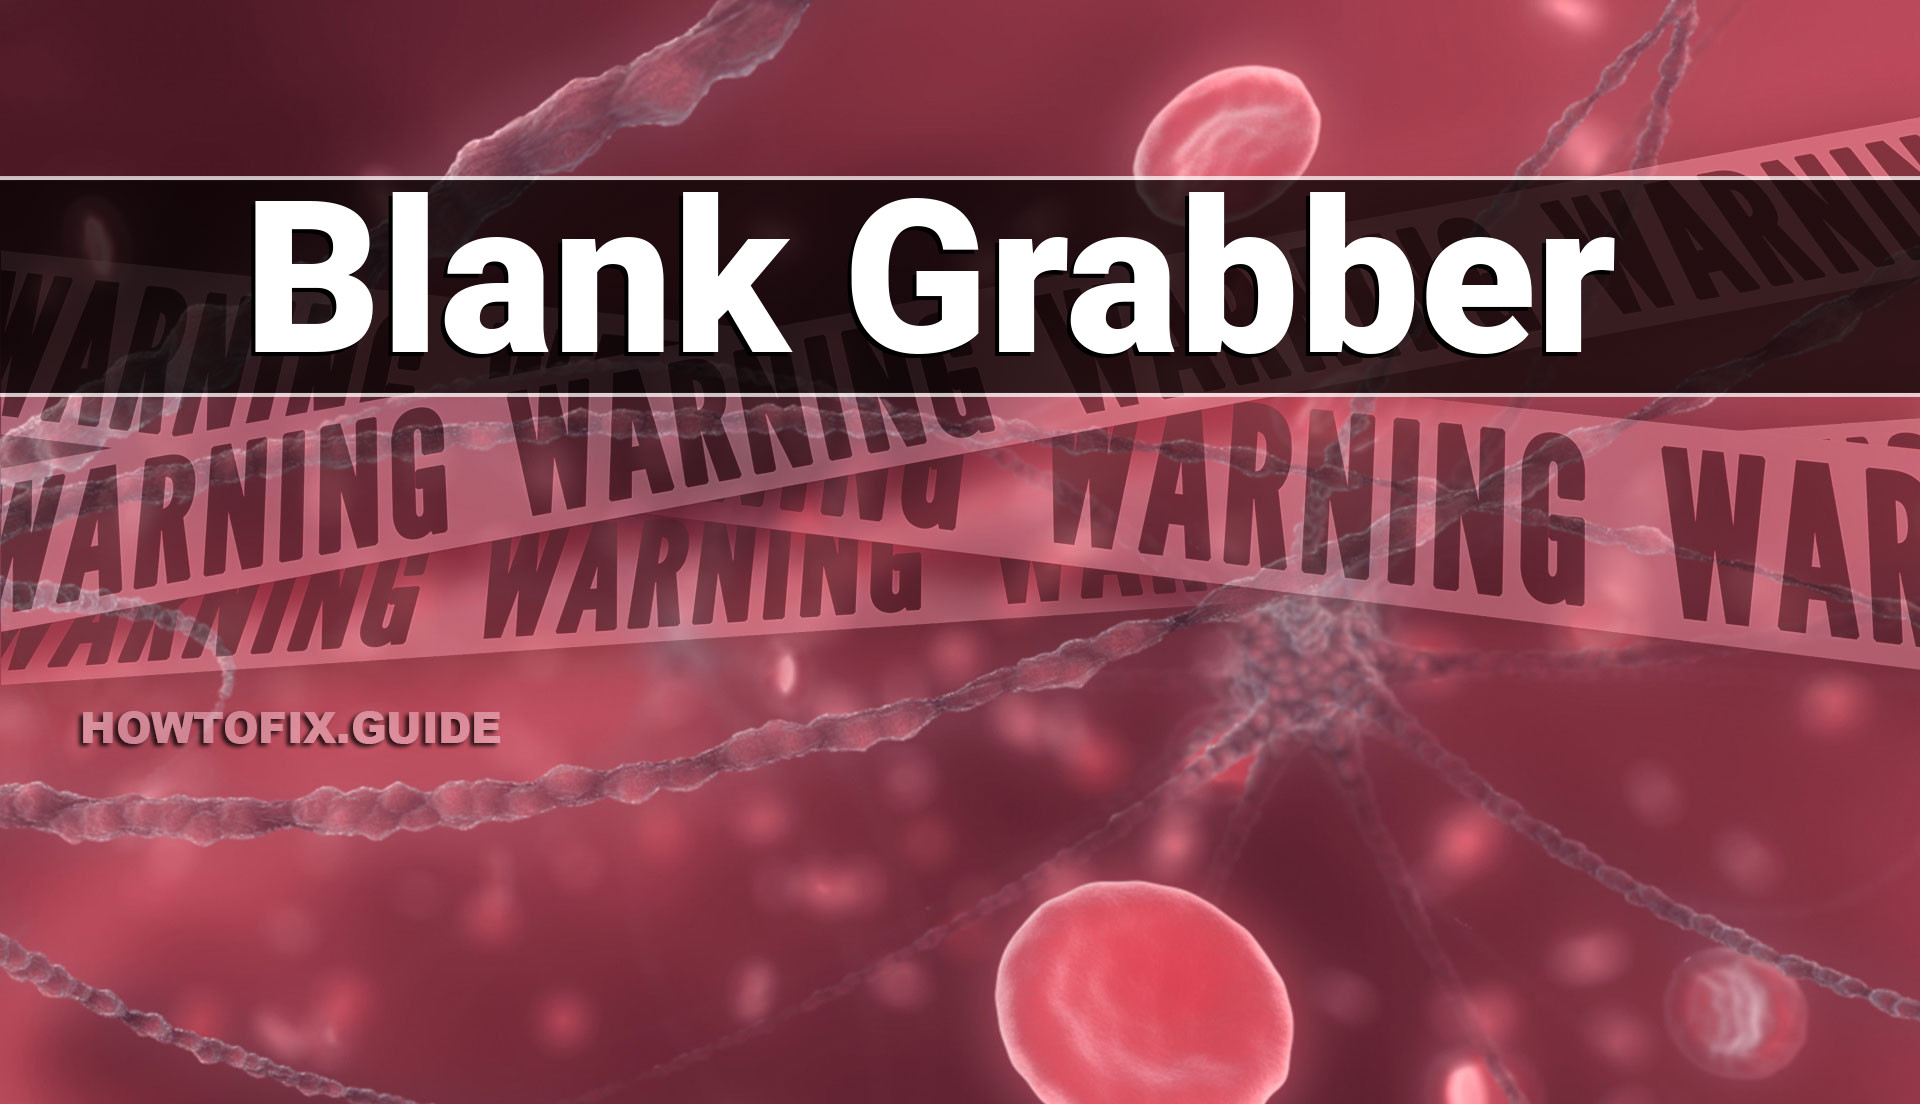 Blank Grabber Malware - Malware removal instructions (updated)